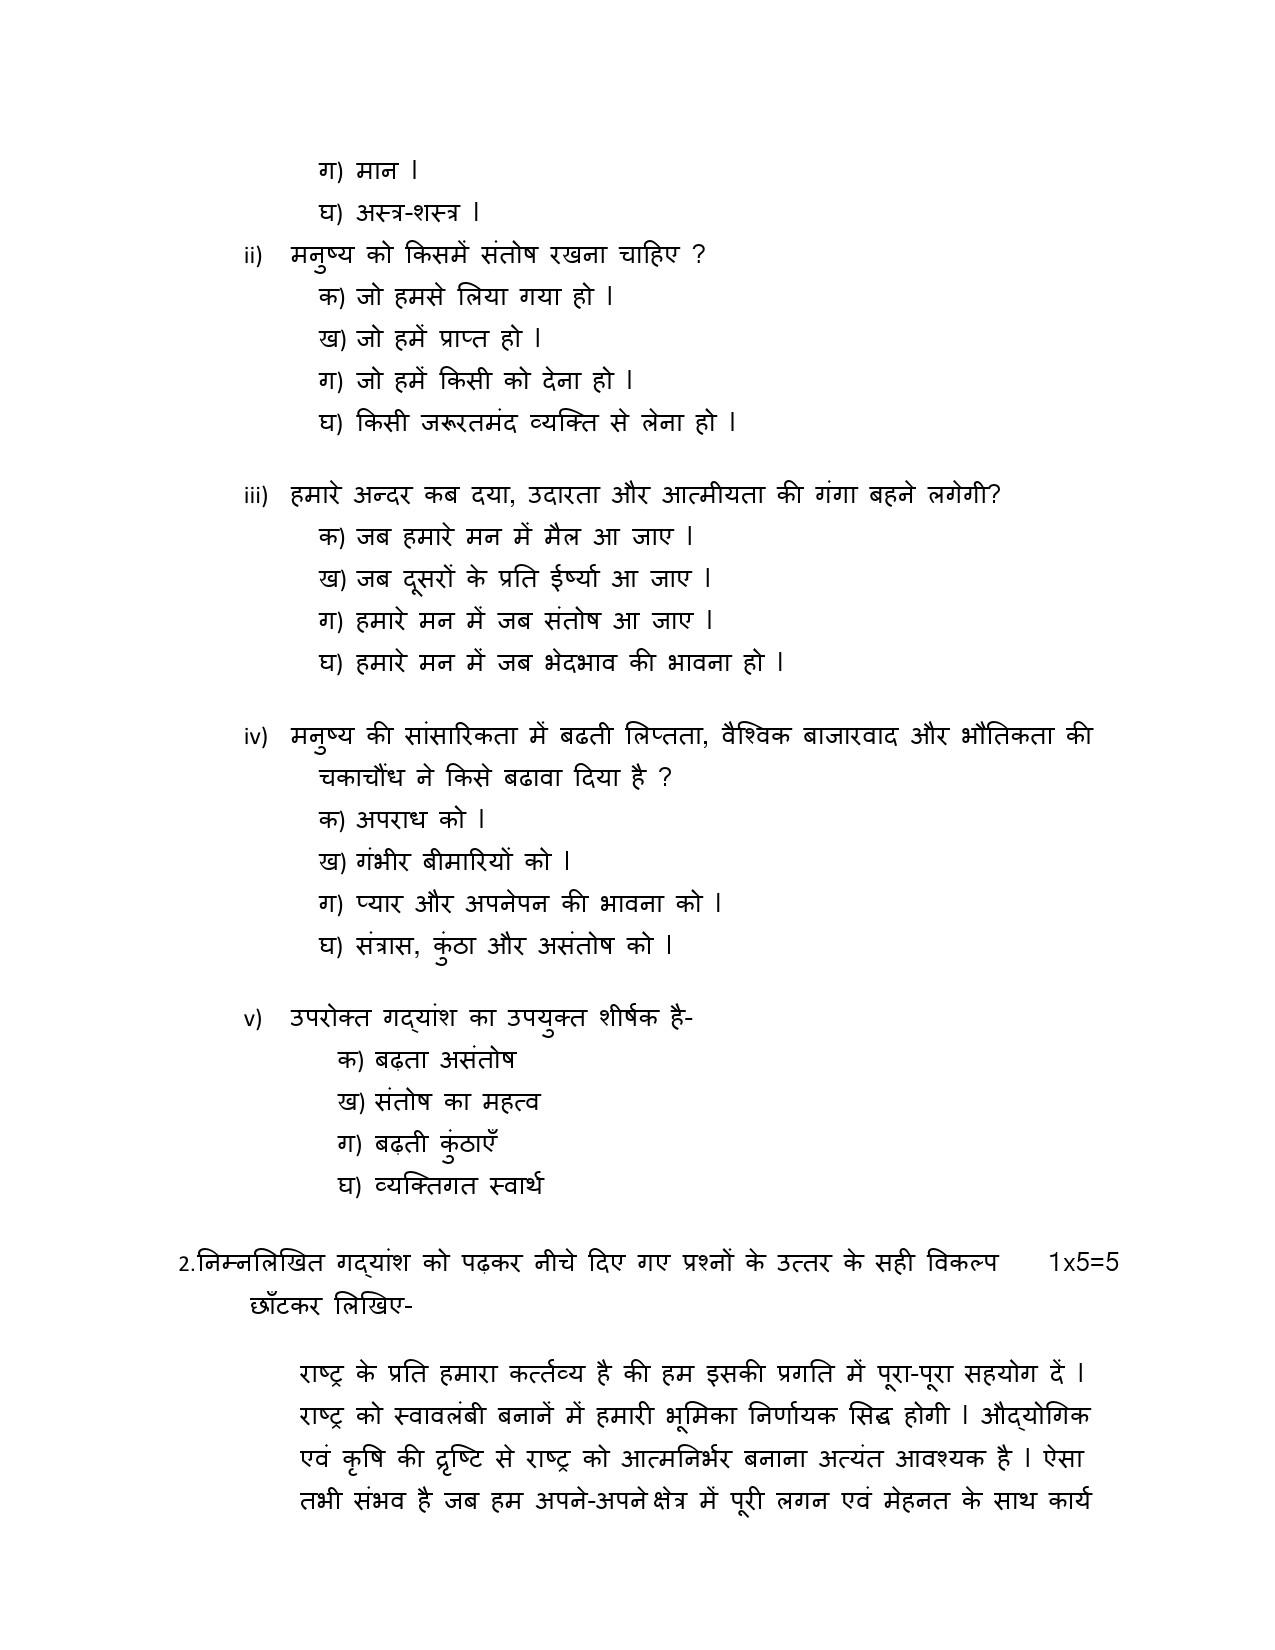 Hindi A CBSE Class X Sample Question Paper 2015 16 - Image 2